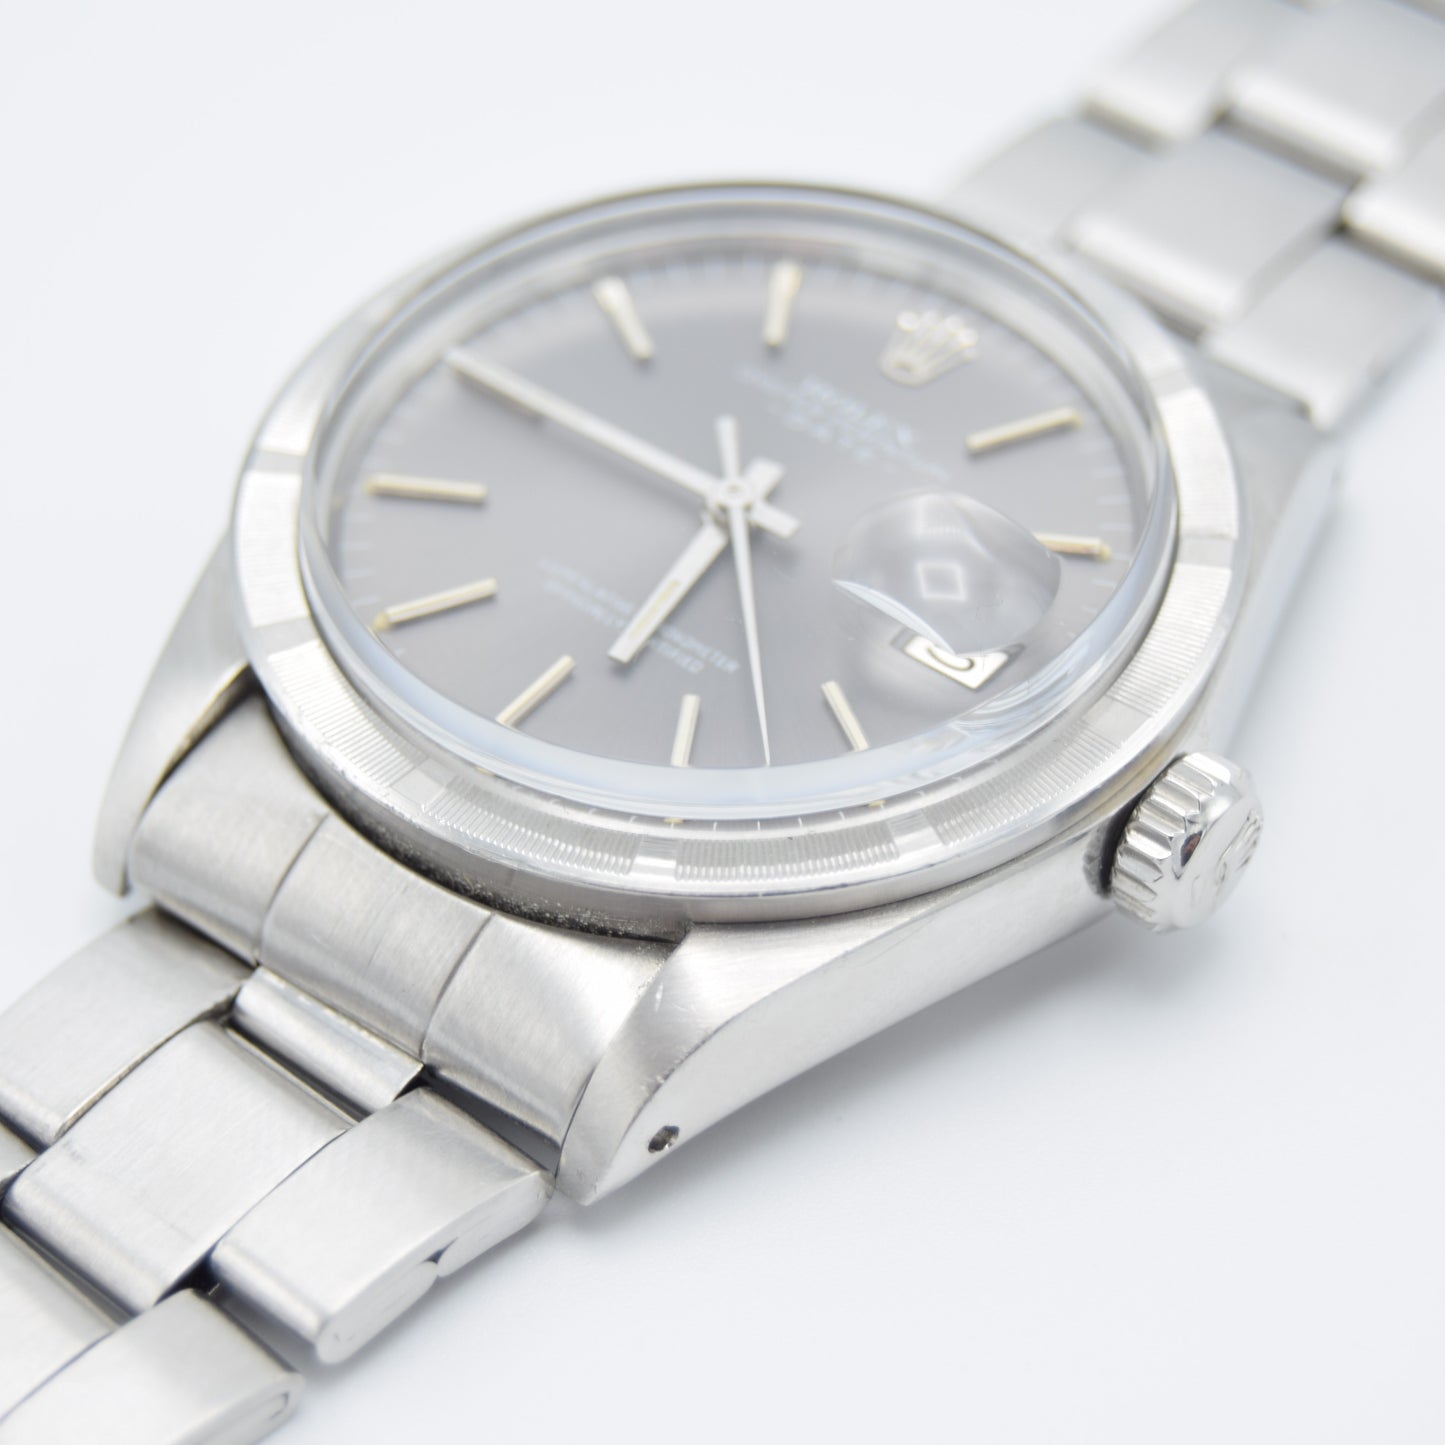 1972 Rolex Oyster Perpetual Date 1501 Grey Dial